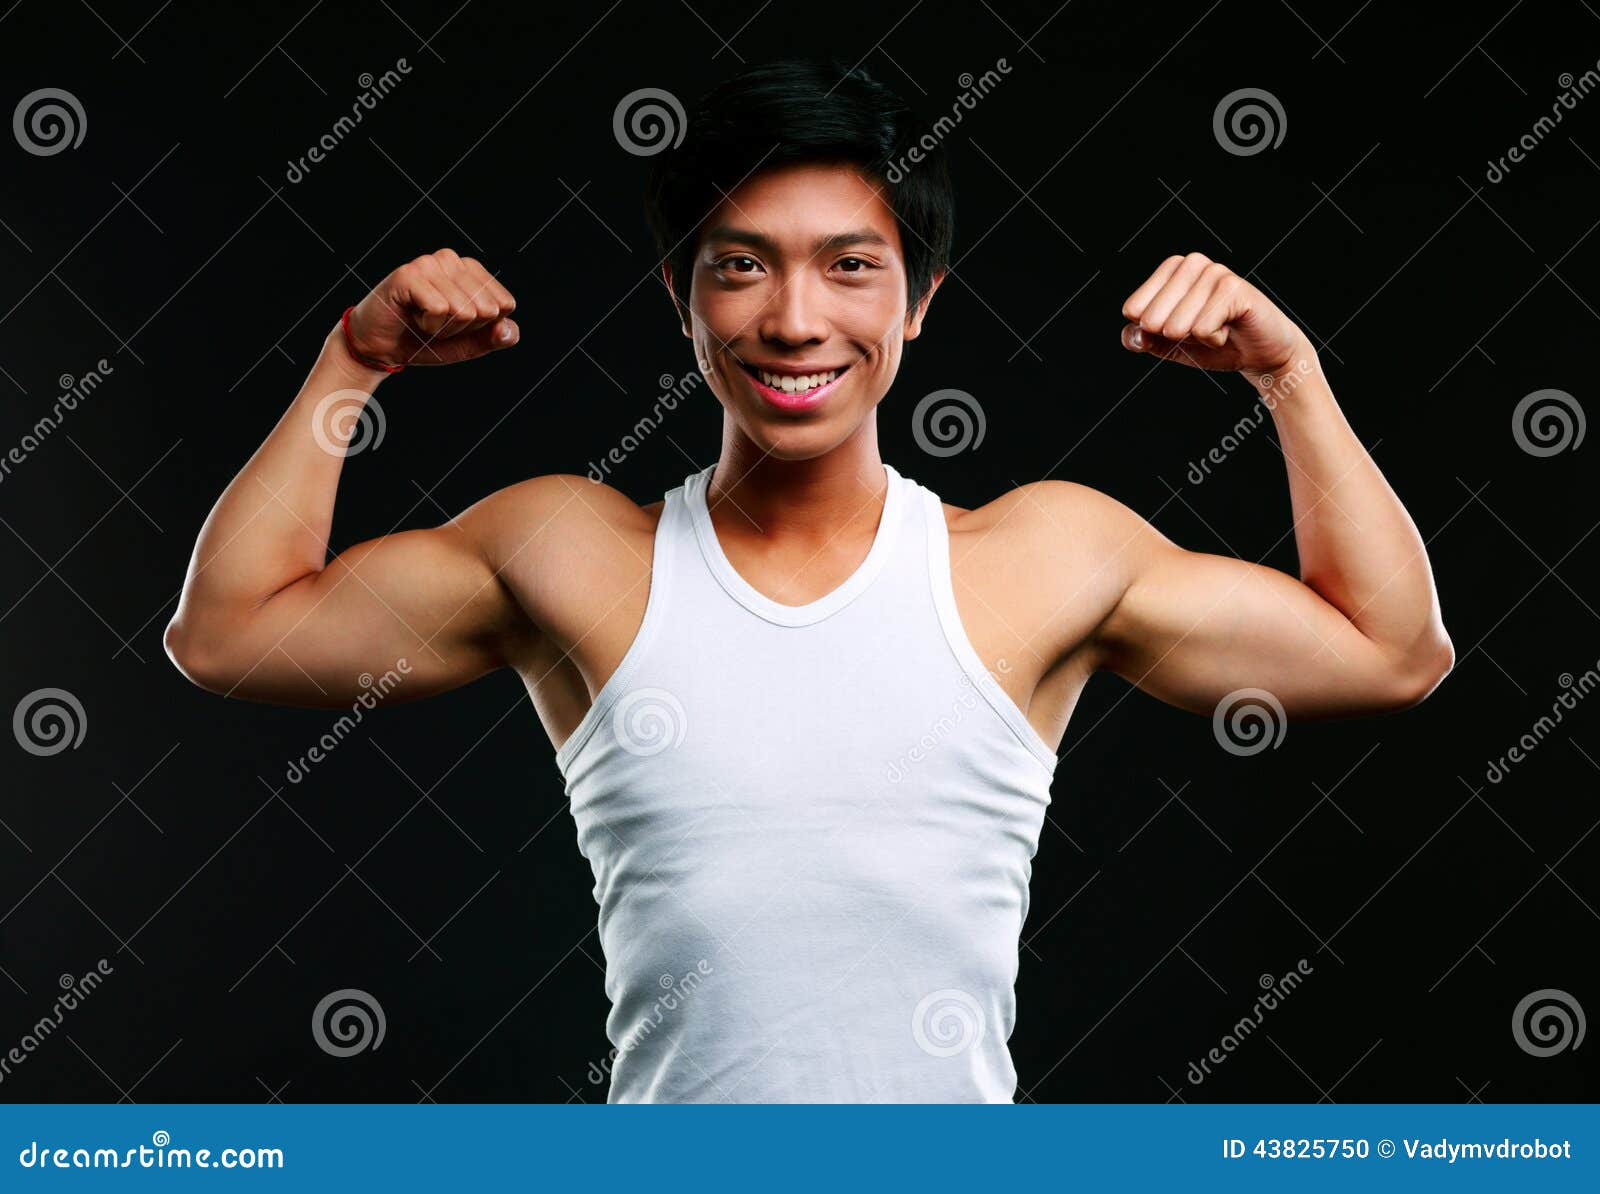 https://thumbs.dreamstime.com/z/muscular-man-arms-stretched-out-smiling-asian-black-background-43825750.jpg